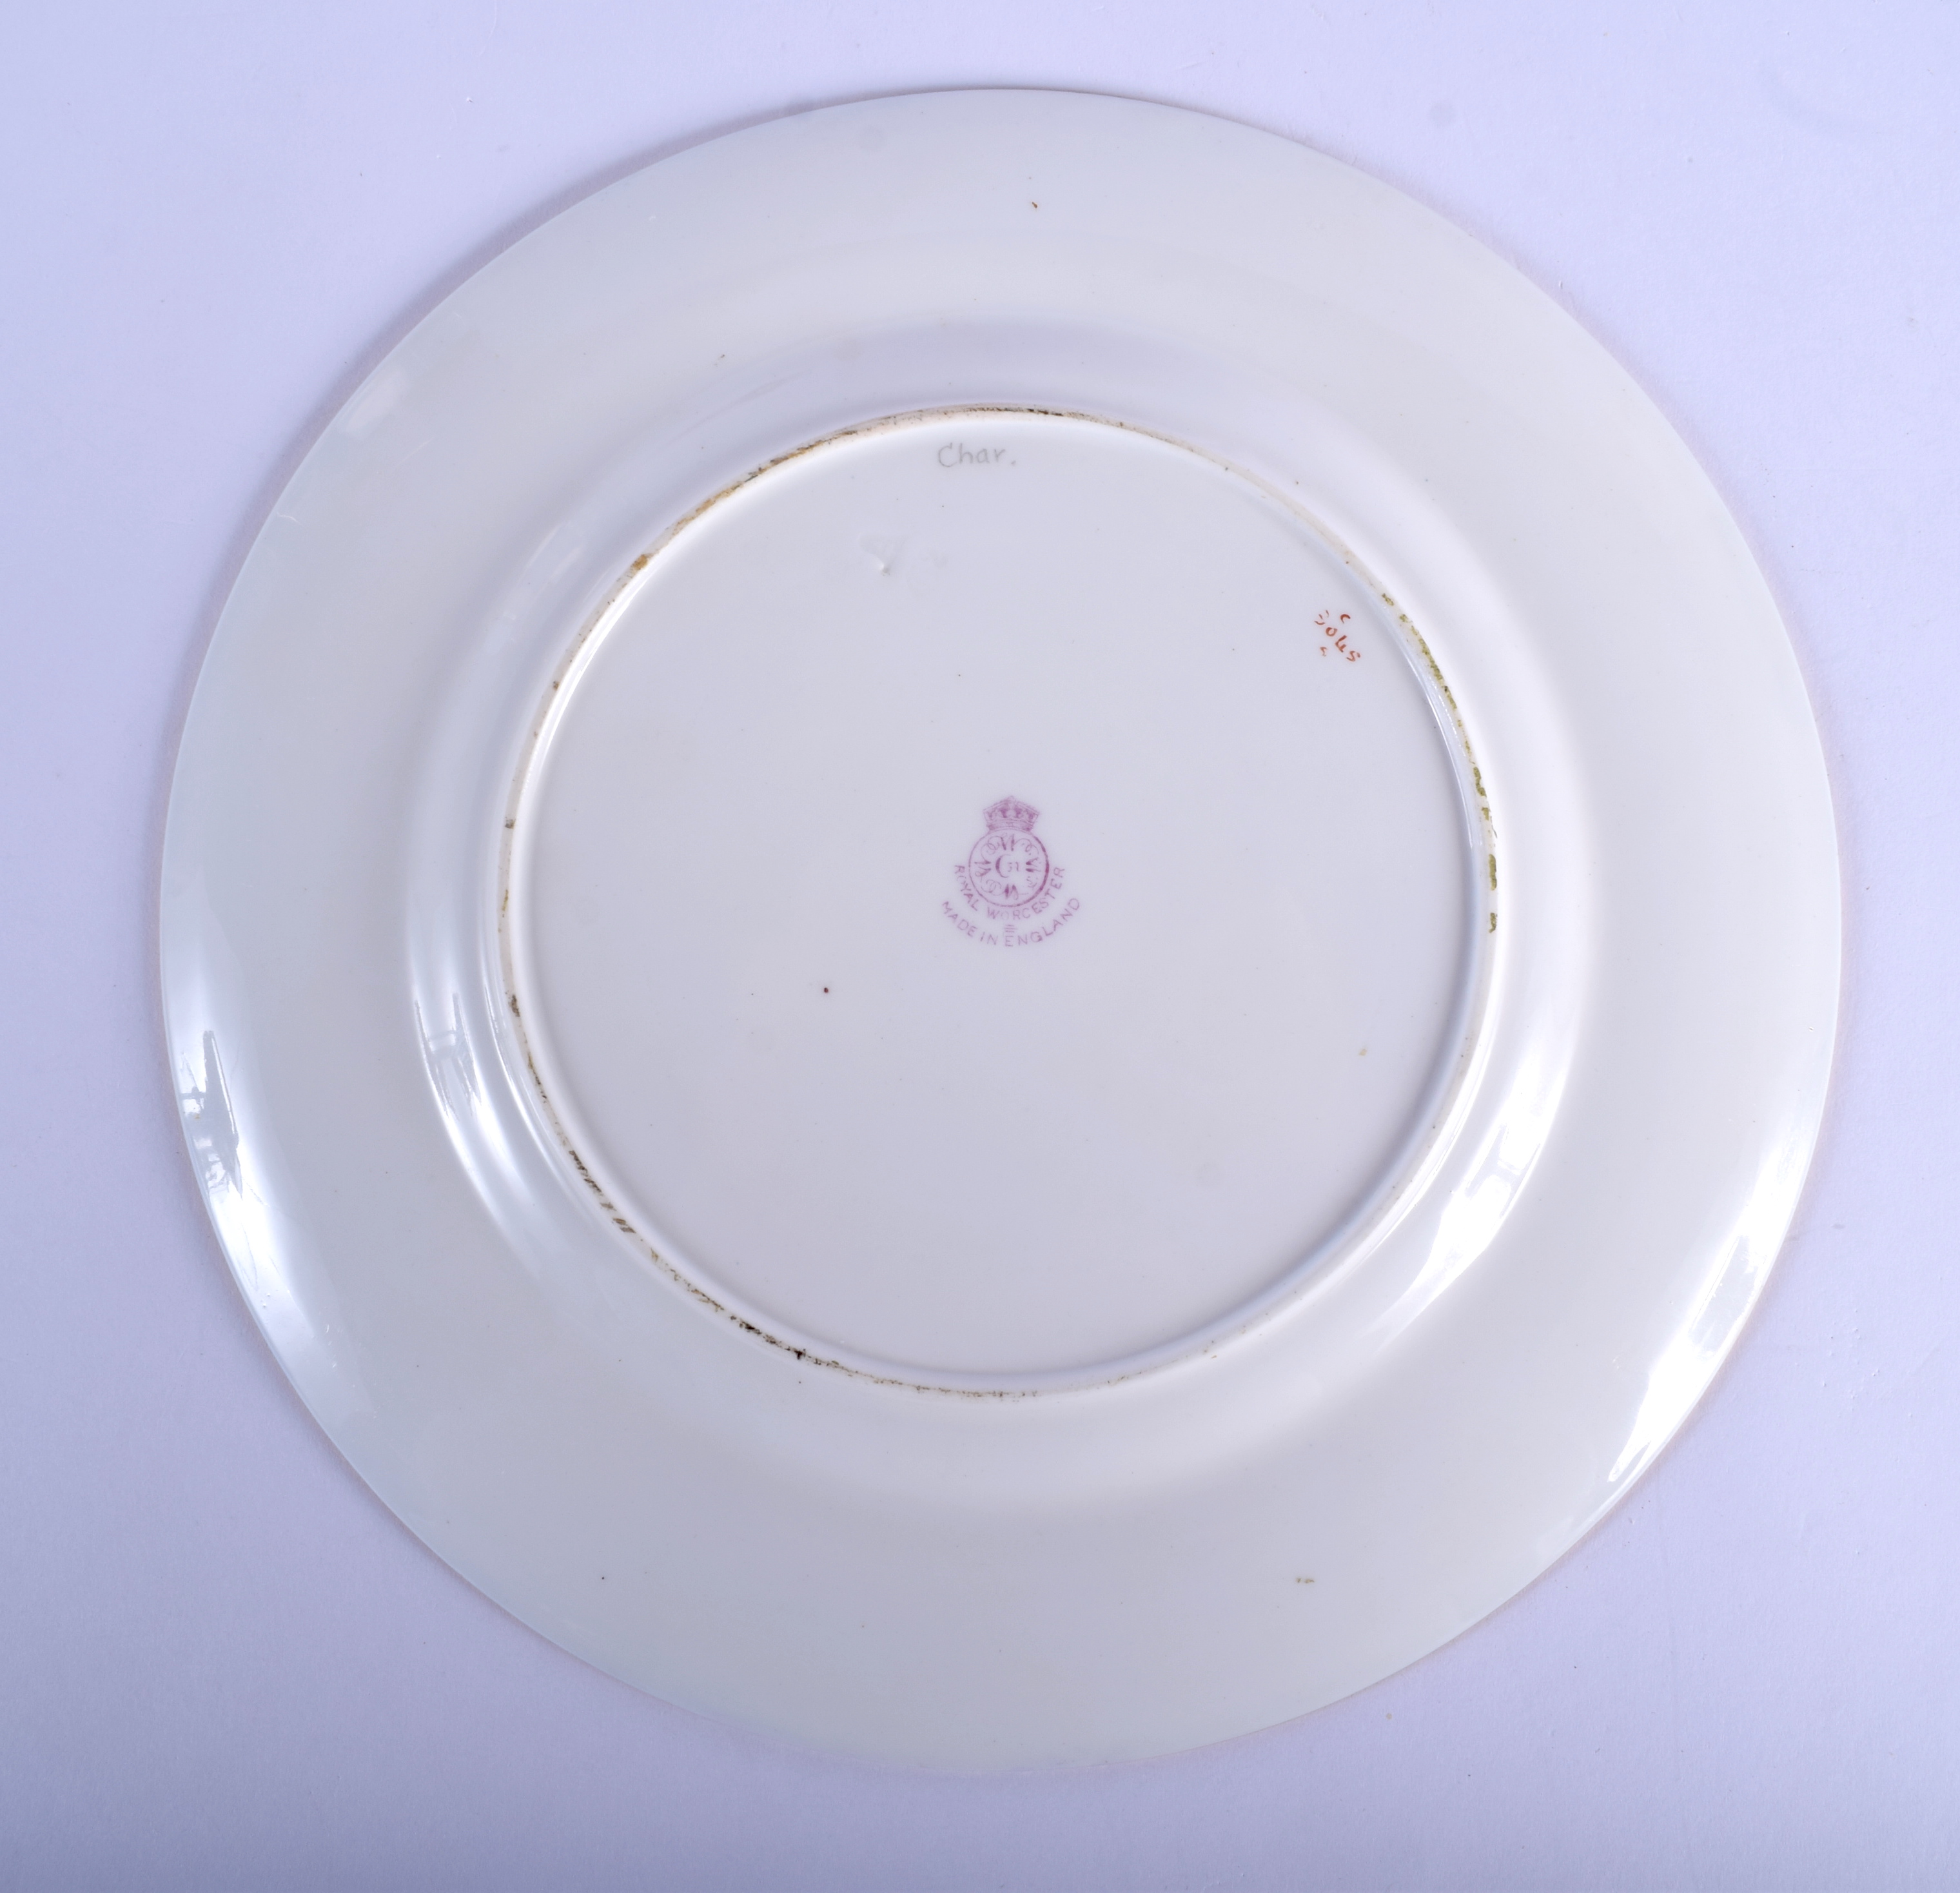 Royal Worcester fine plate painted with swimming fish, titled Char, by Harry Ayrton signed date cod - Image 2 of 2